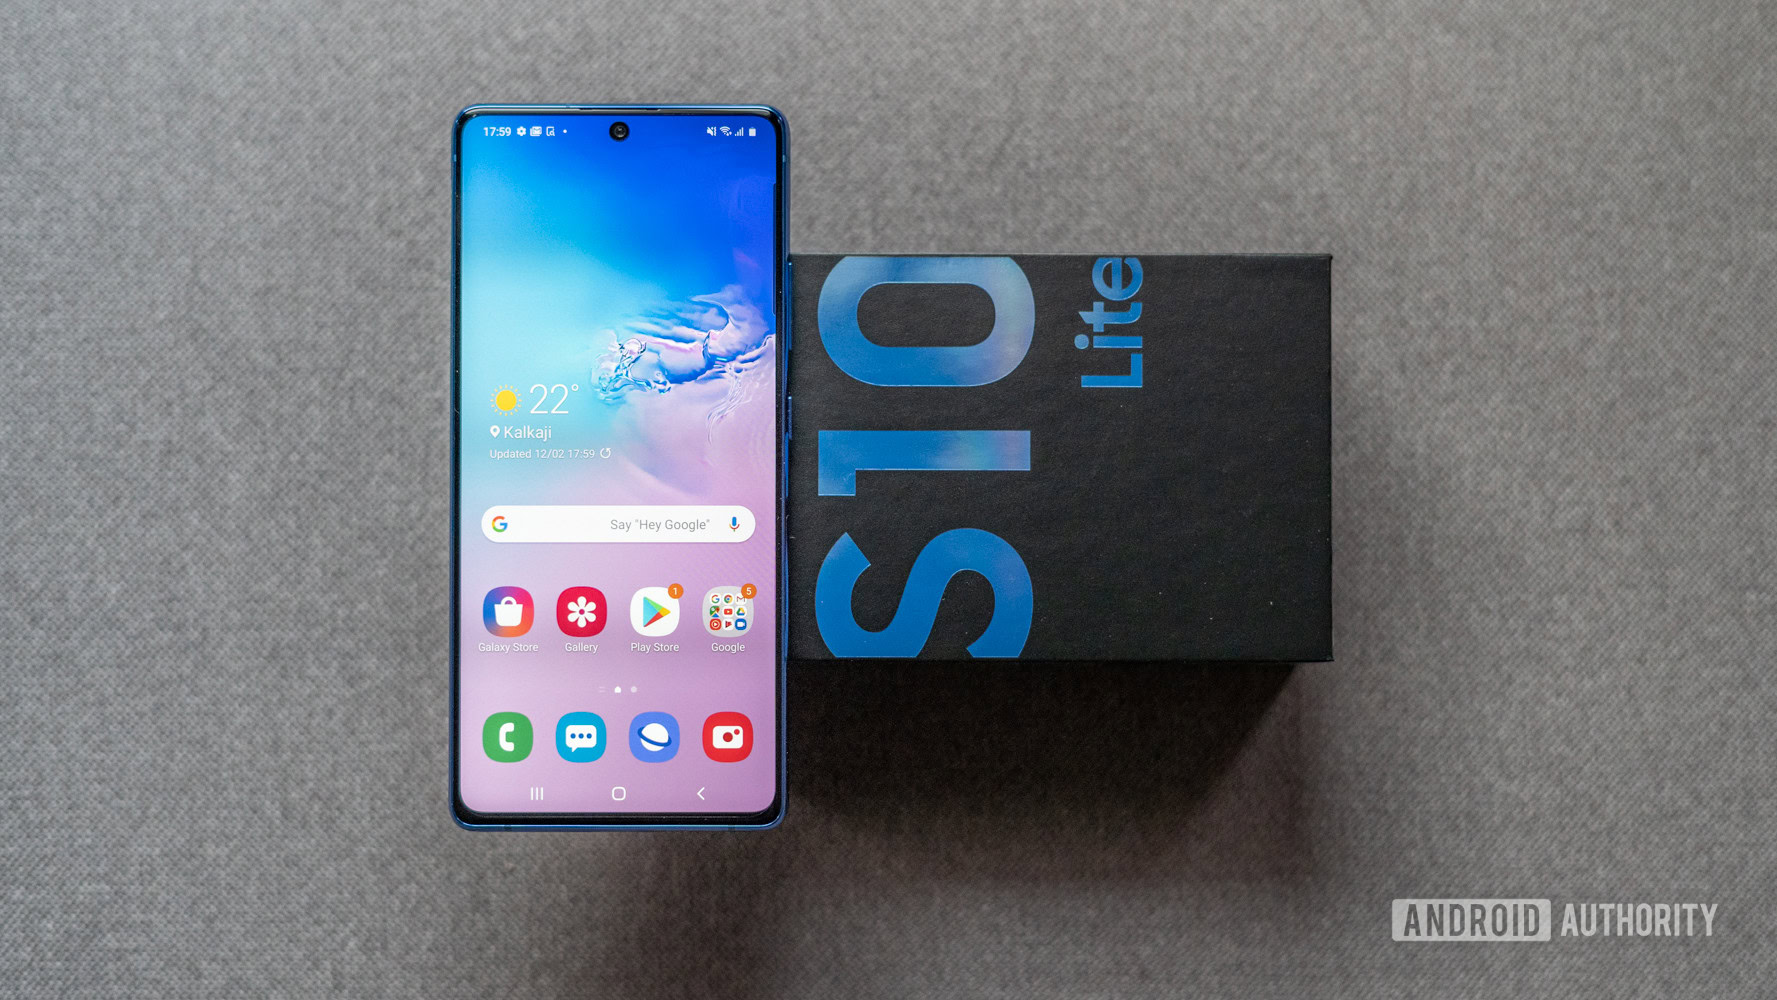 Samsung Galaxy S10 Lite review: An affordable flagship done right